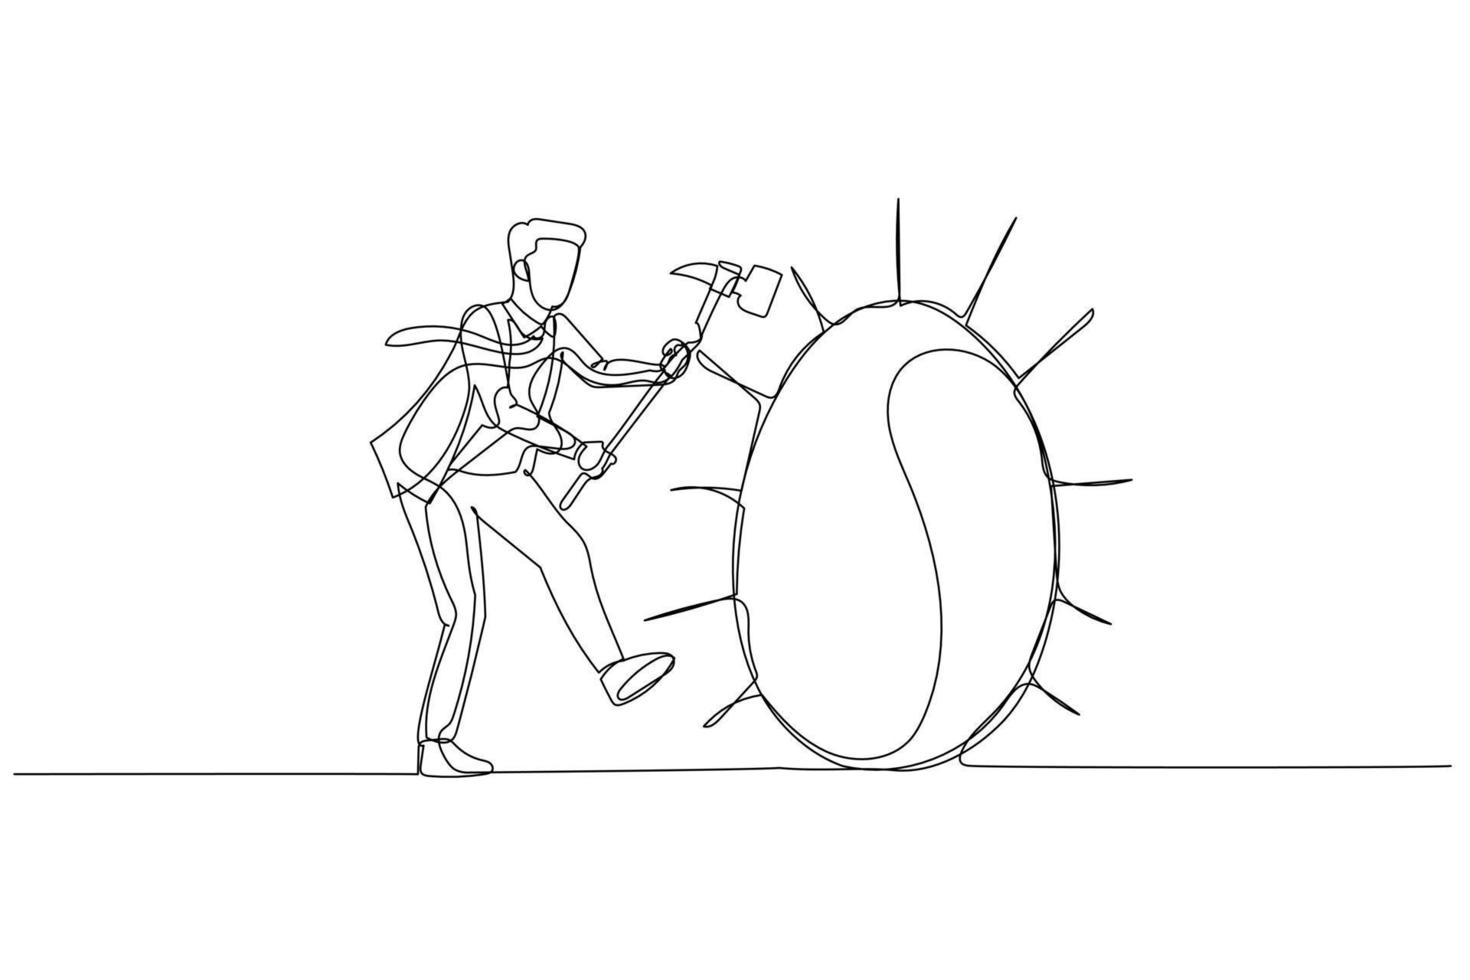 Drawing of businessman try to hit giant golden egg. Concept of business success and tough luck. Single continuous line art style vector